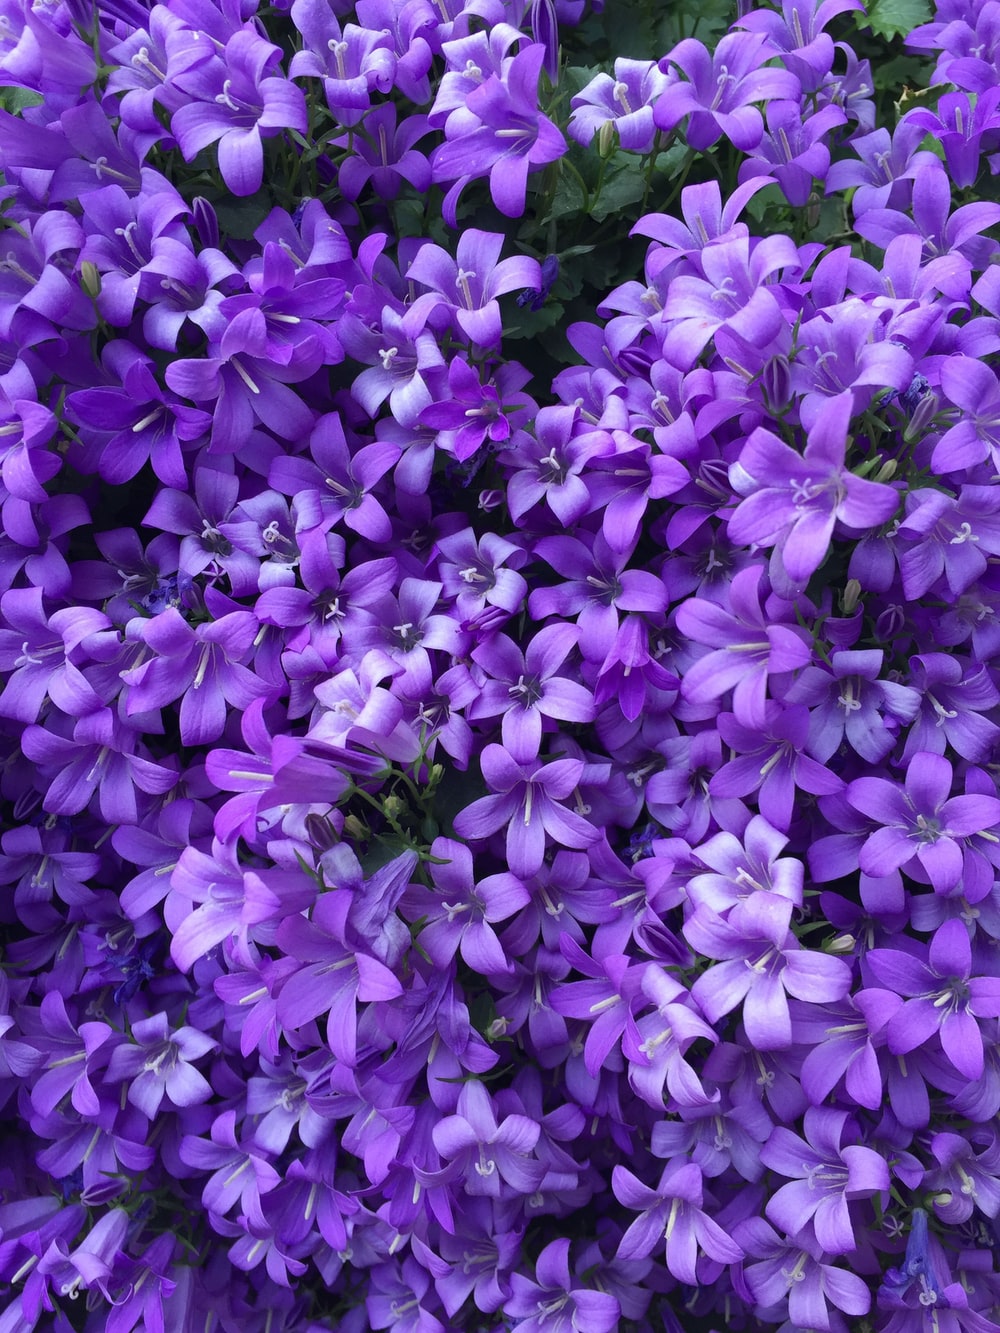 Purple Flower Picture. Download Free Image